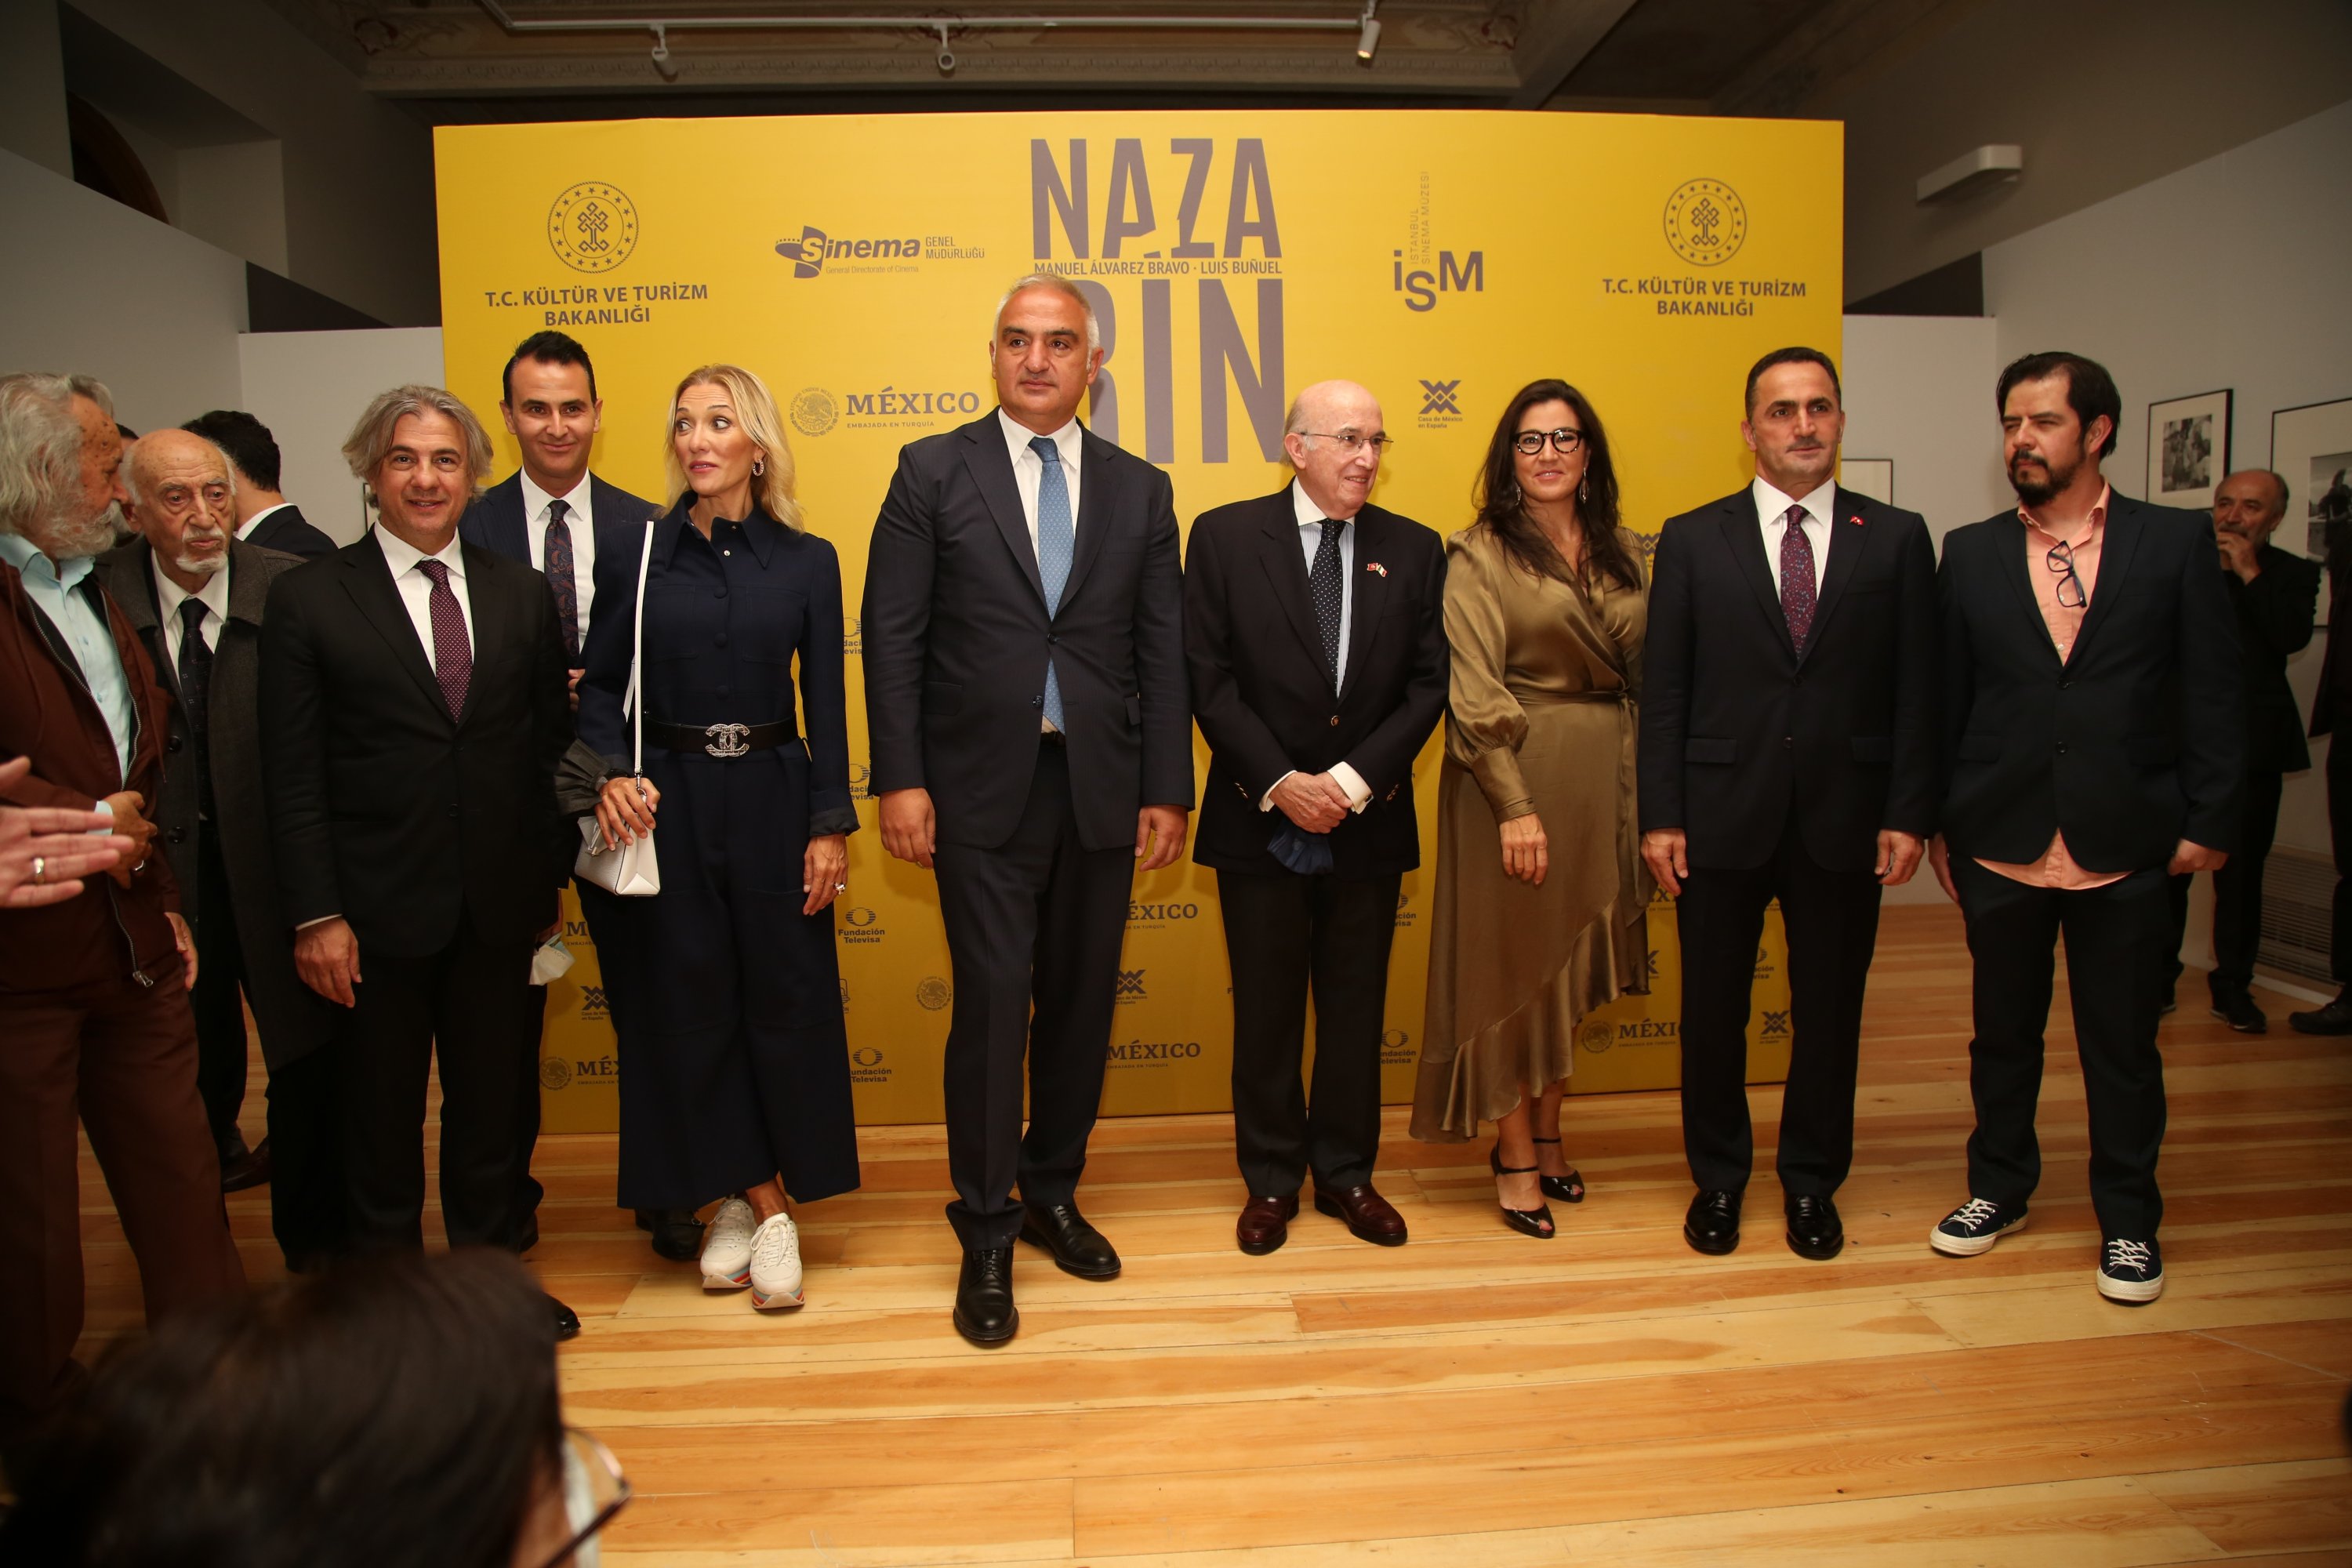 Minister of Culture and Tourism Mehmet Nuri Ersoy (C-L) and the Mexican Ambassador to Ankara Jose Luis Martinez y Hermandez (C-R) among others pose during the "Nazarin" exhibition at the Istanbul Cinema Museum, in Istanbul, Turkey, Oct. 8, 2021.